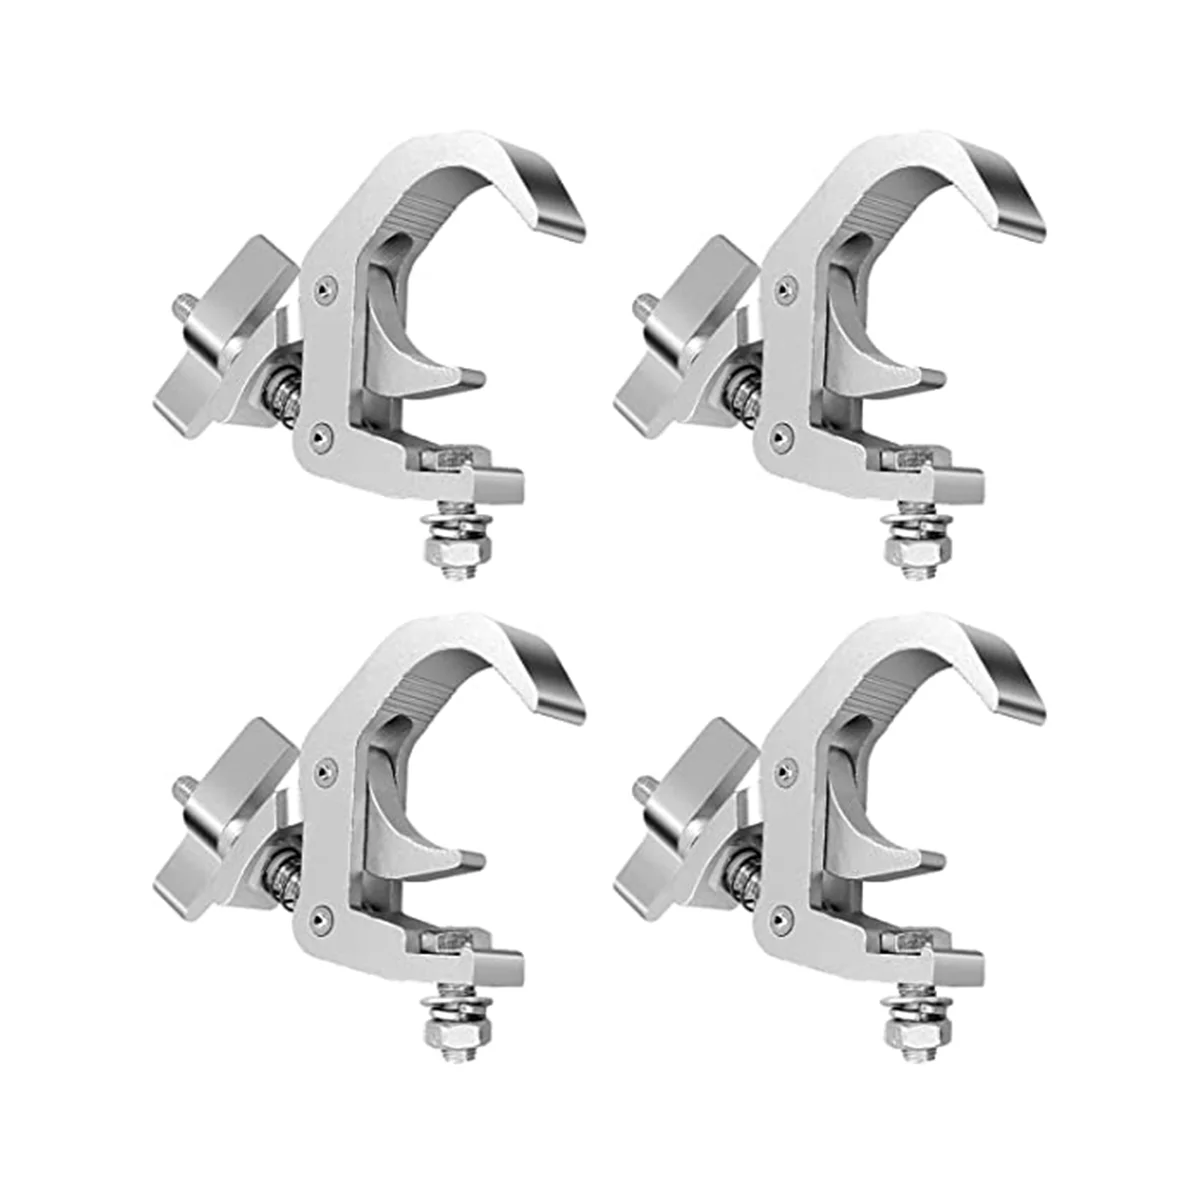 

4Packstage Lighting Clip Hook, Aluminum Alloy Professional Rack Clamp, for Moving the Head Stage Stage Lighting Fixtures